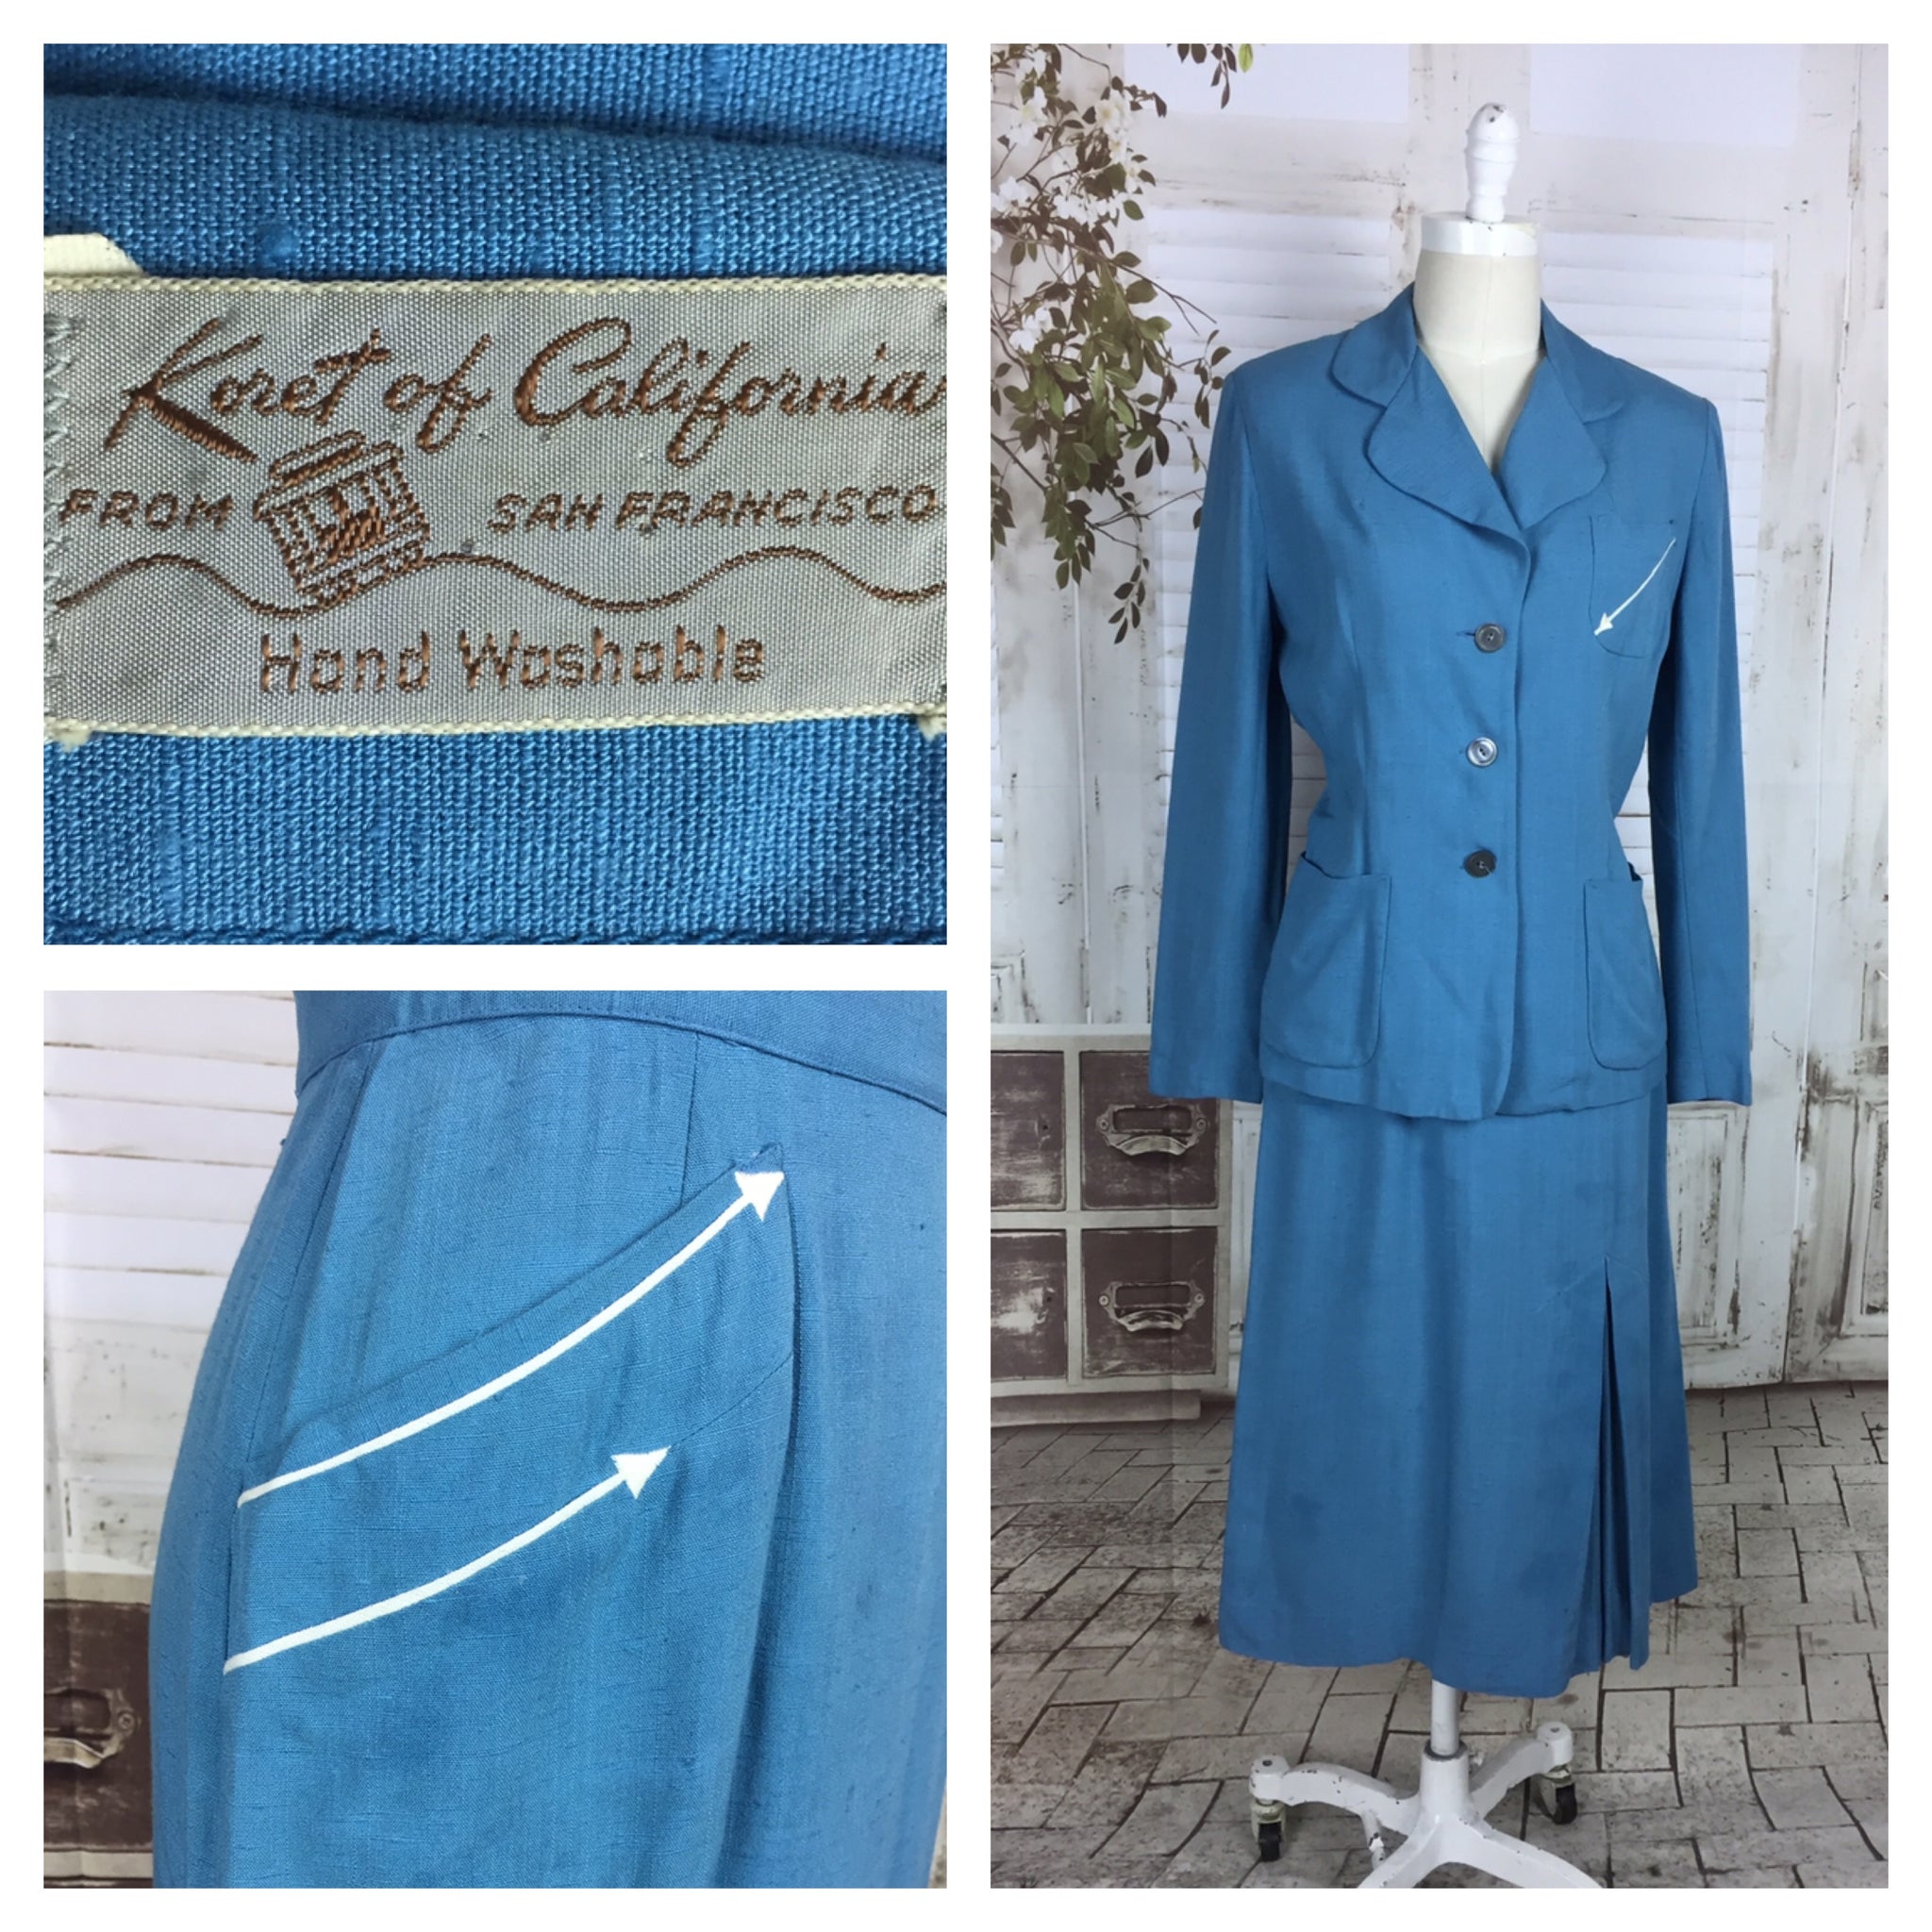 Original 1950s Sky Blue Vintage Linen Summer Suit With Embroidered White Arrows By Koret Of California